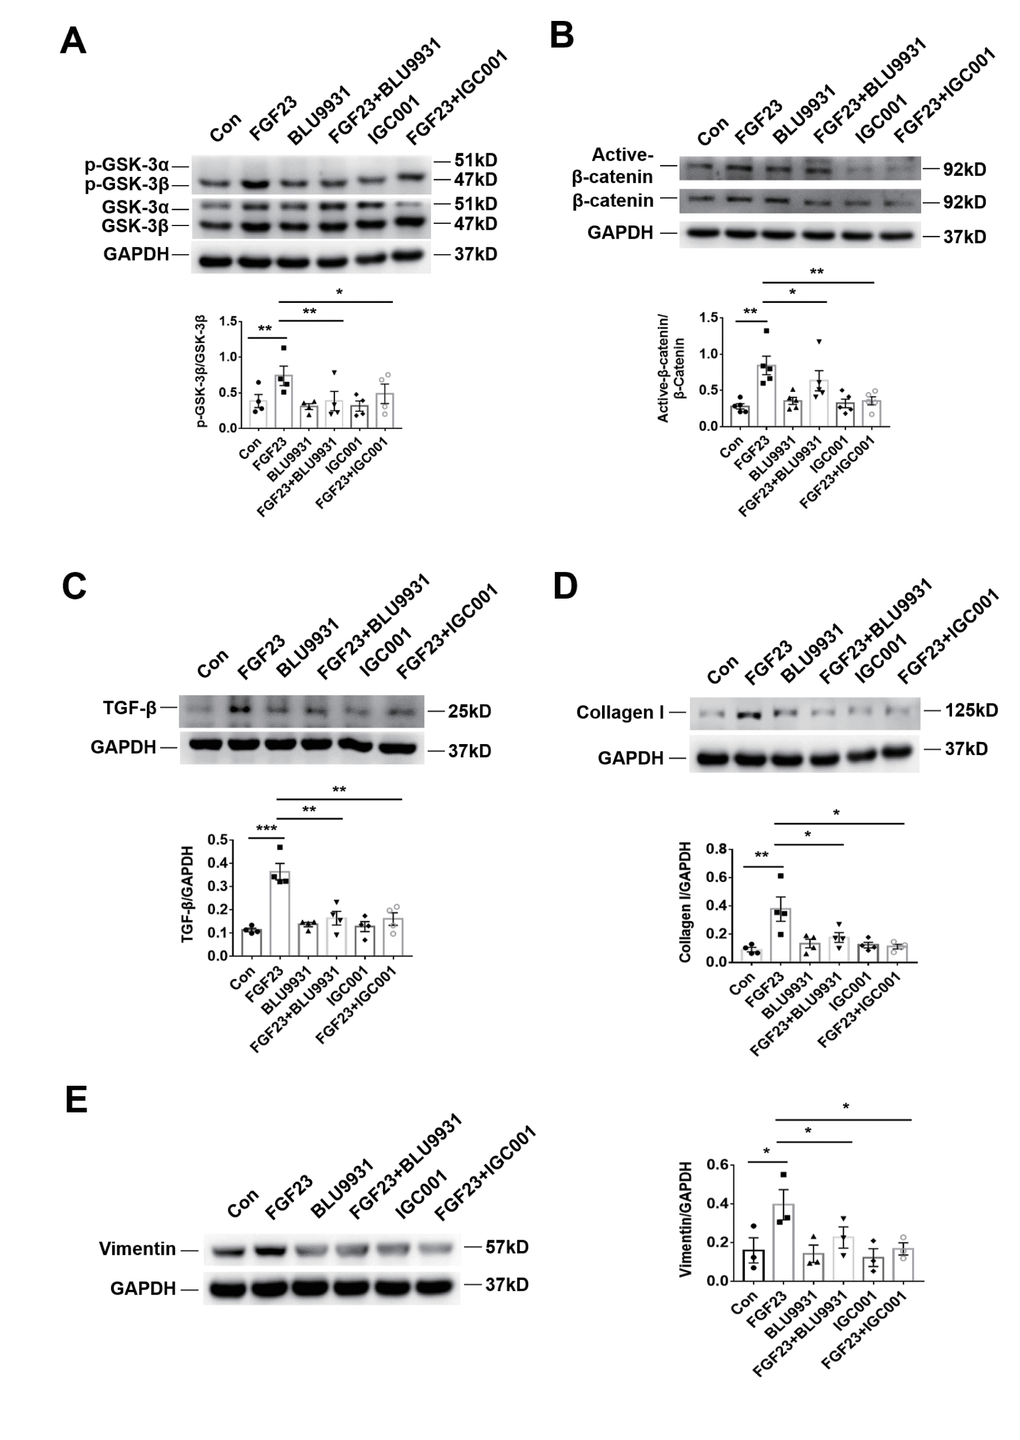 Profibrotic effect of FGF23 can be inhibited by treatment with FGFR4 inhibitor BLU9931 or β-catenin inhibitor IGC001. (A) Western blot of p-GSK-3β. (B) Western blot of active-β-catenin. (C) Western blot of TGF-β. (D) Western blot of collagen I. These representative blots were performed in the same gel as (A), so that both panels shared the same loading controls. (E) Western blot of vimentin. BLU9931, 100 nM; IGC001, 5 μM. *P **P 